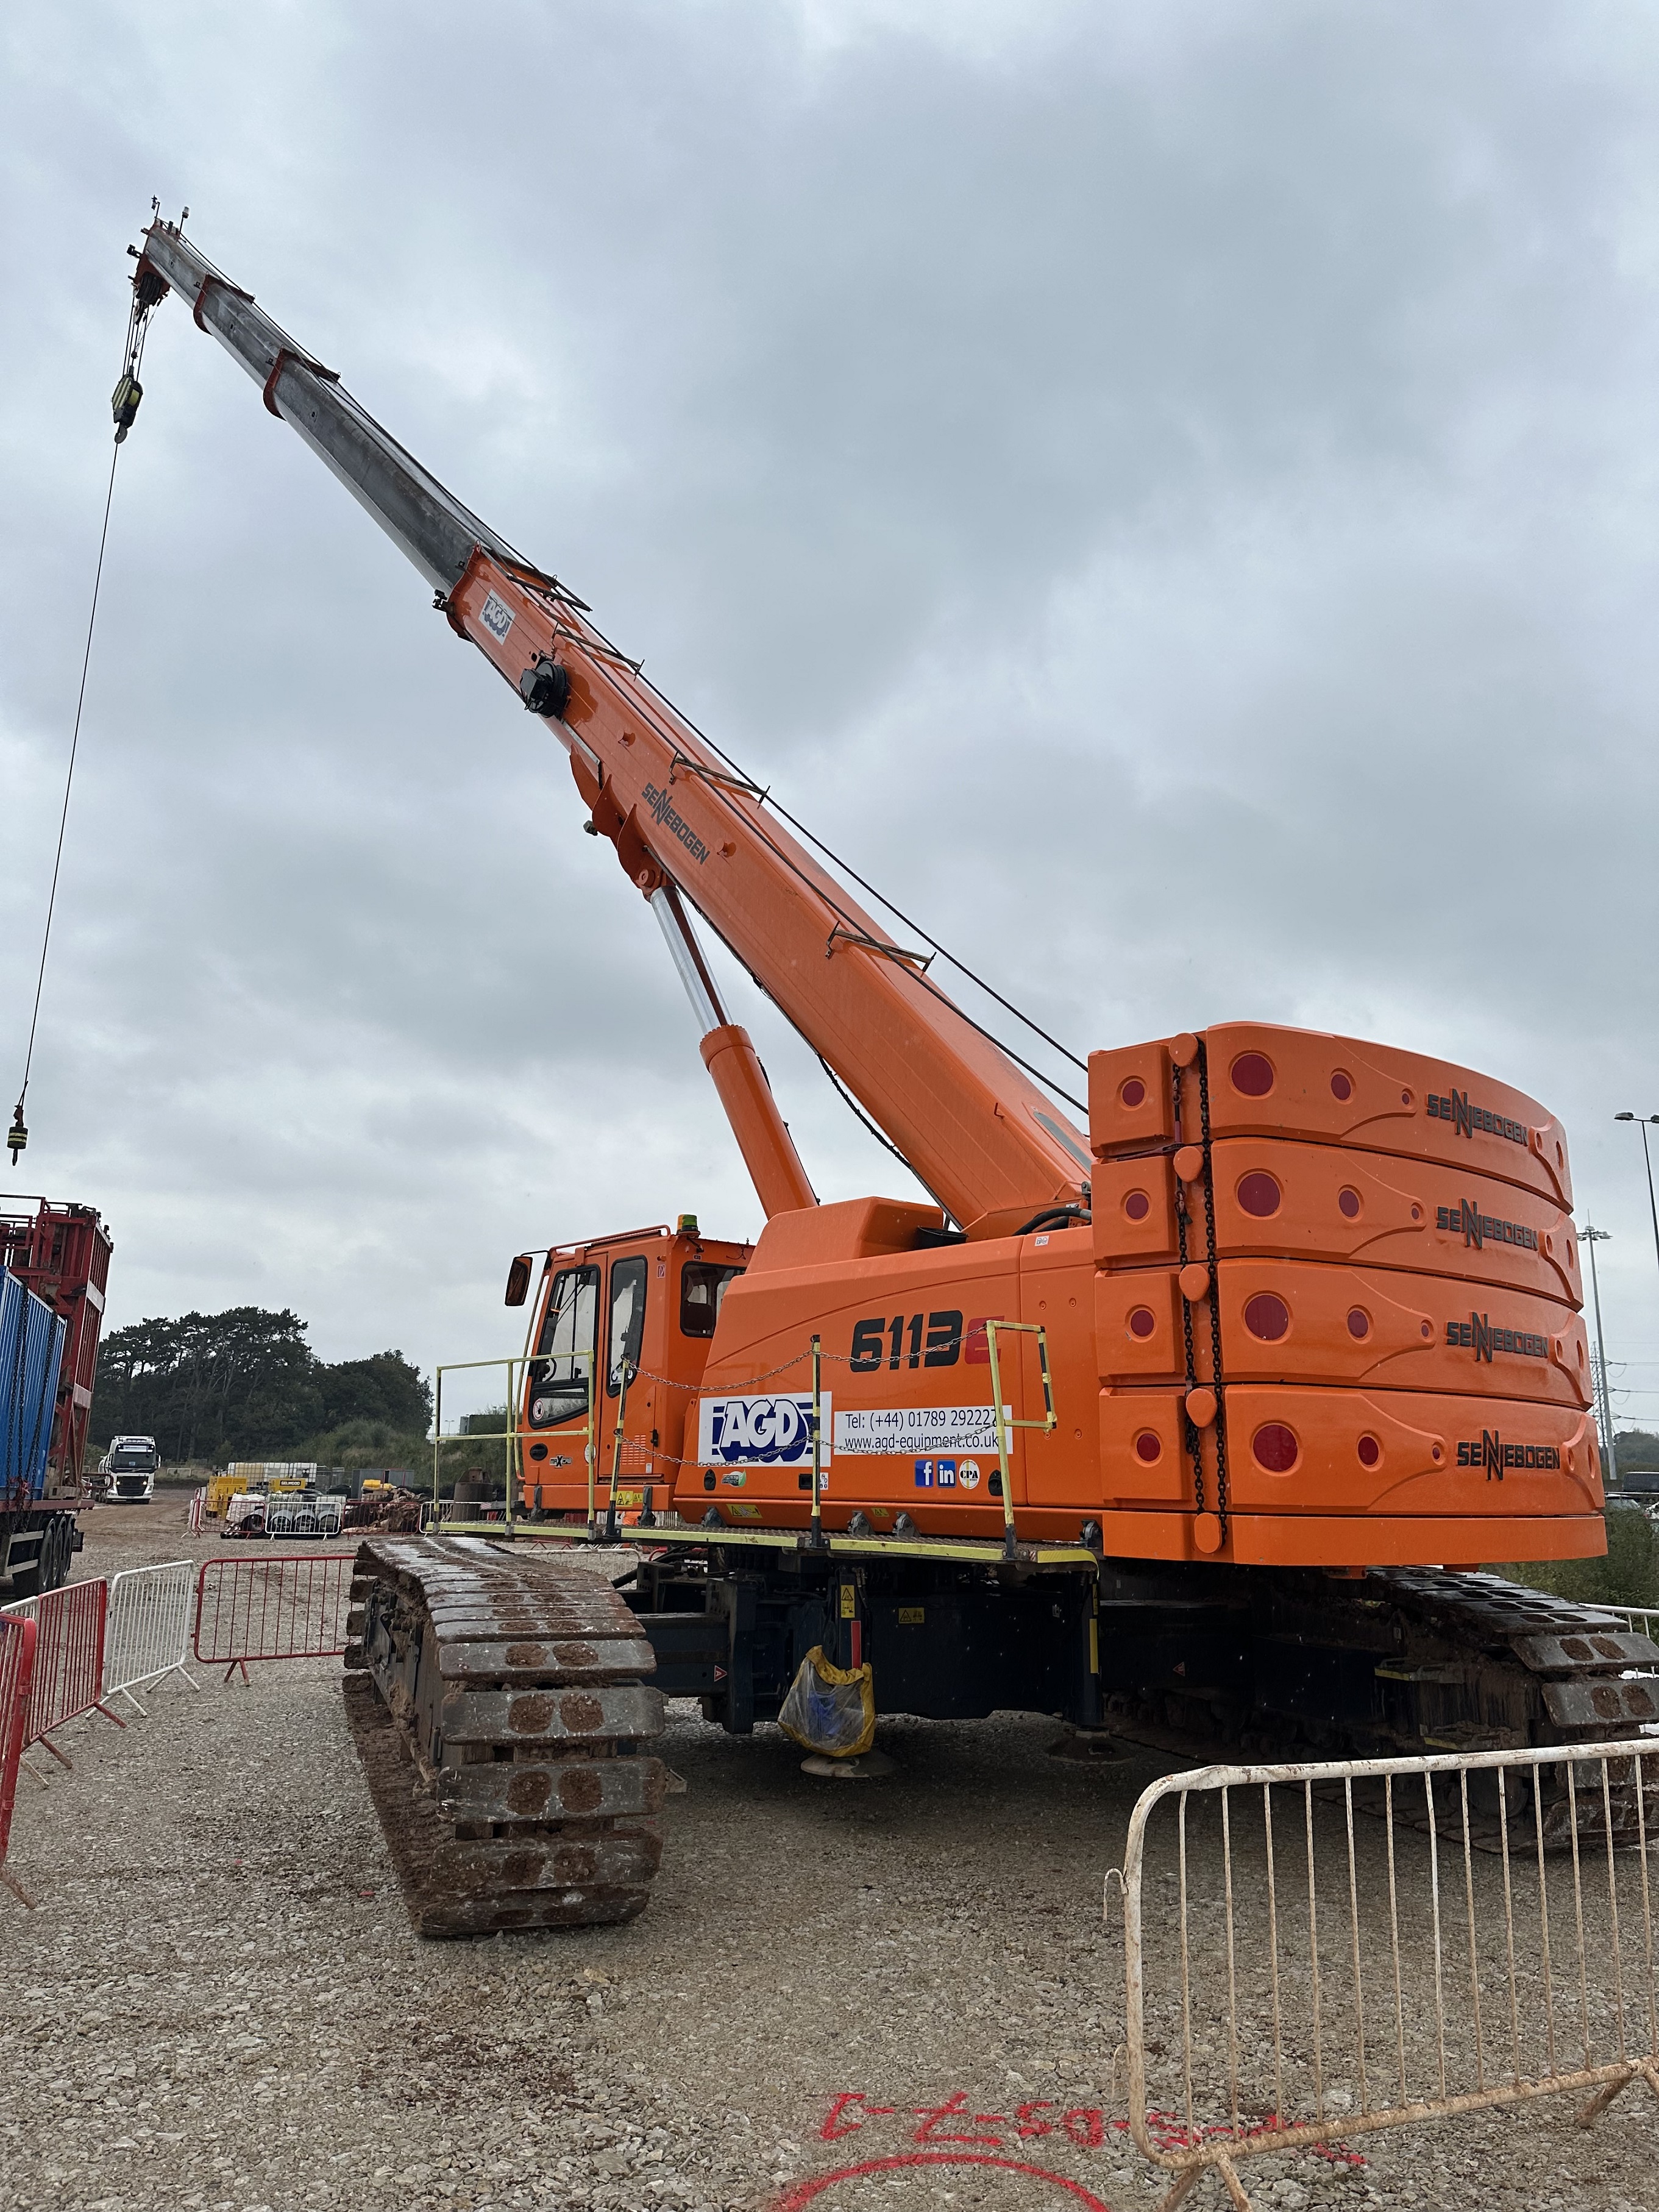 UK Suppliers of Advanced Hydraulic Crawler Crane Hire Solutions